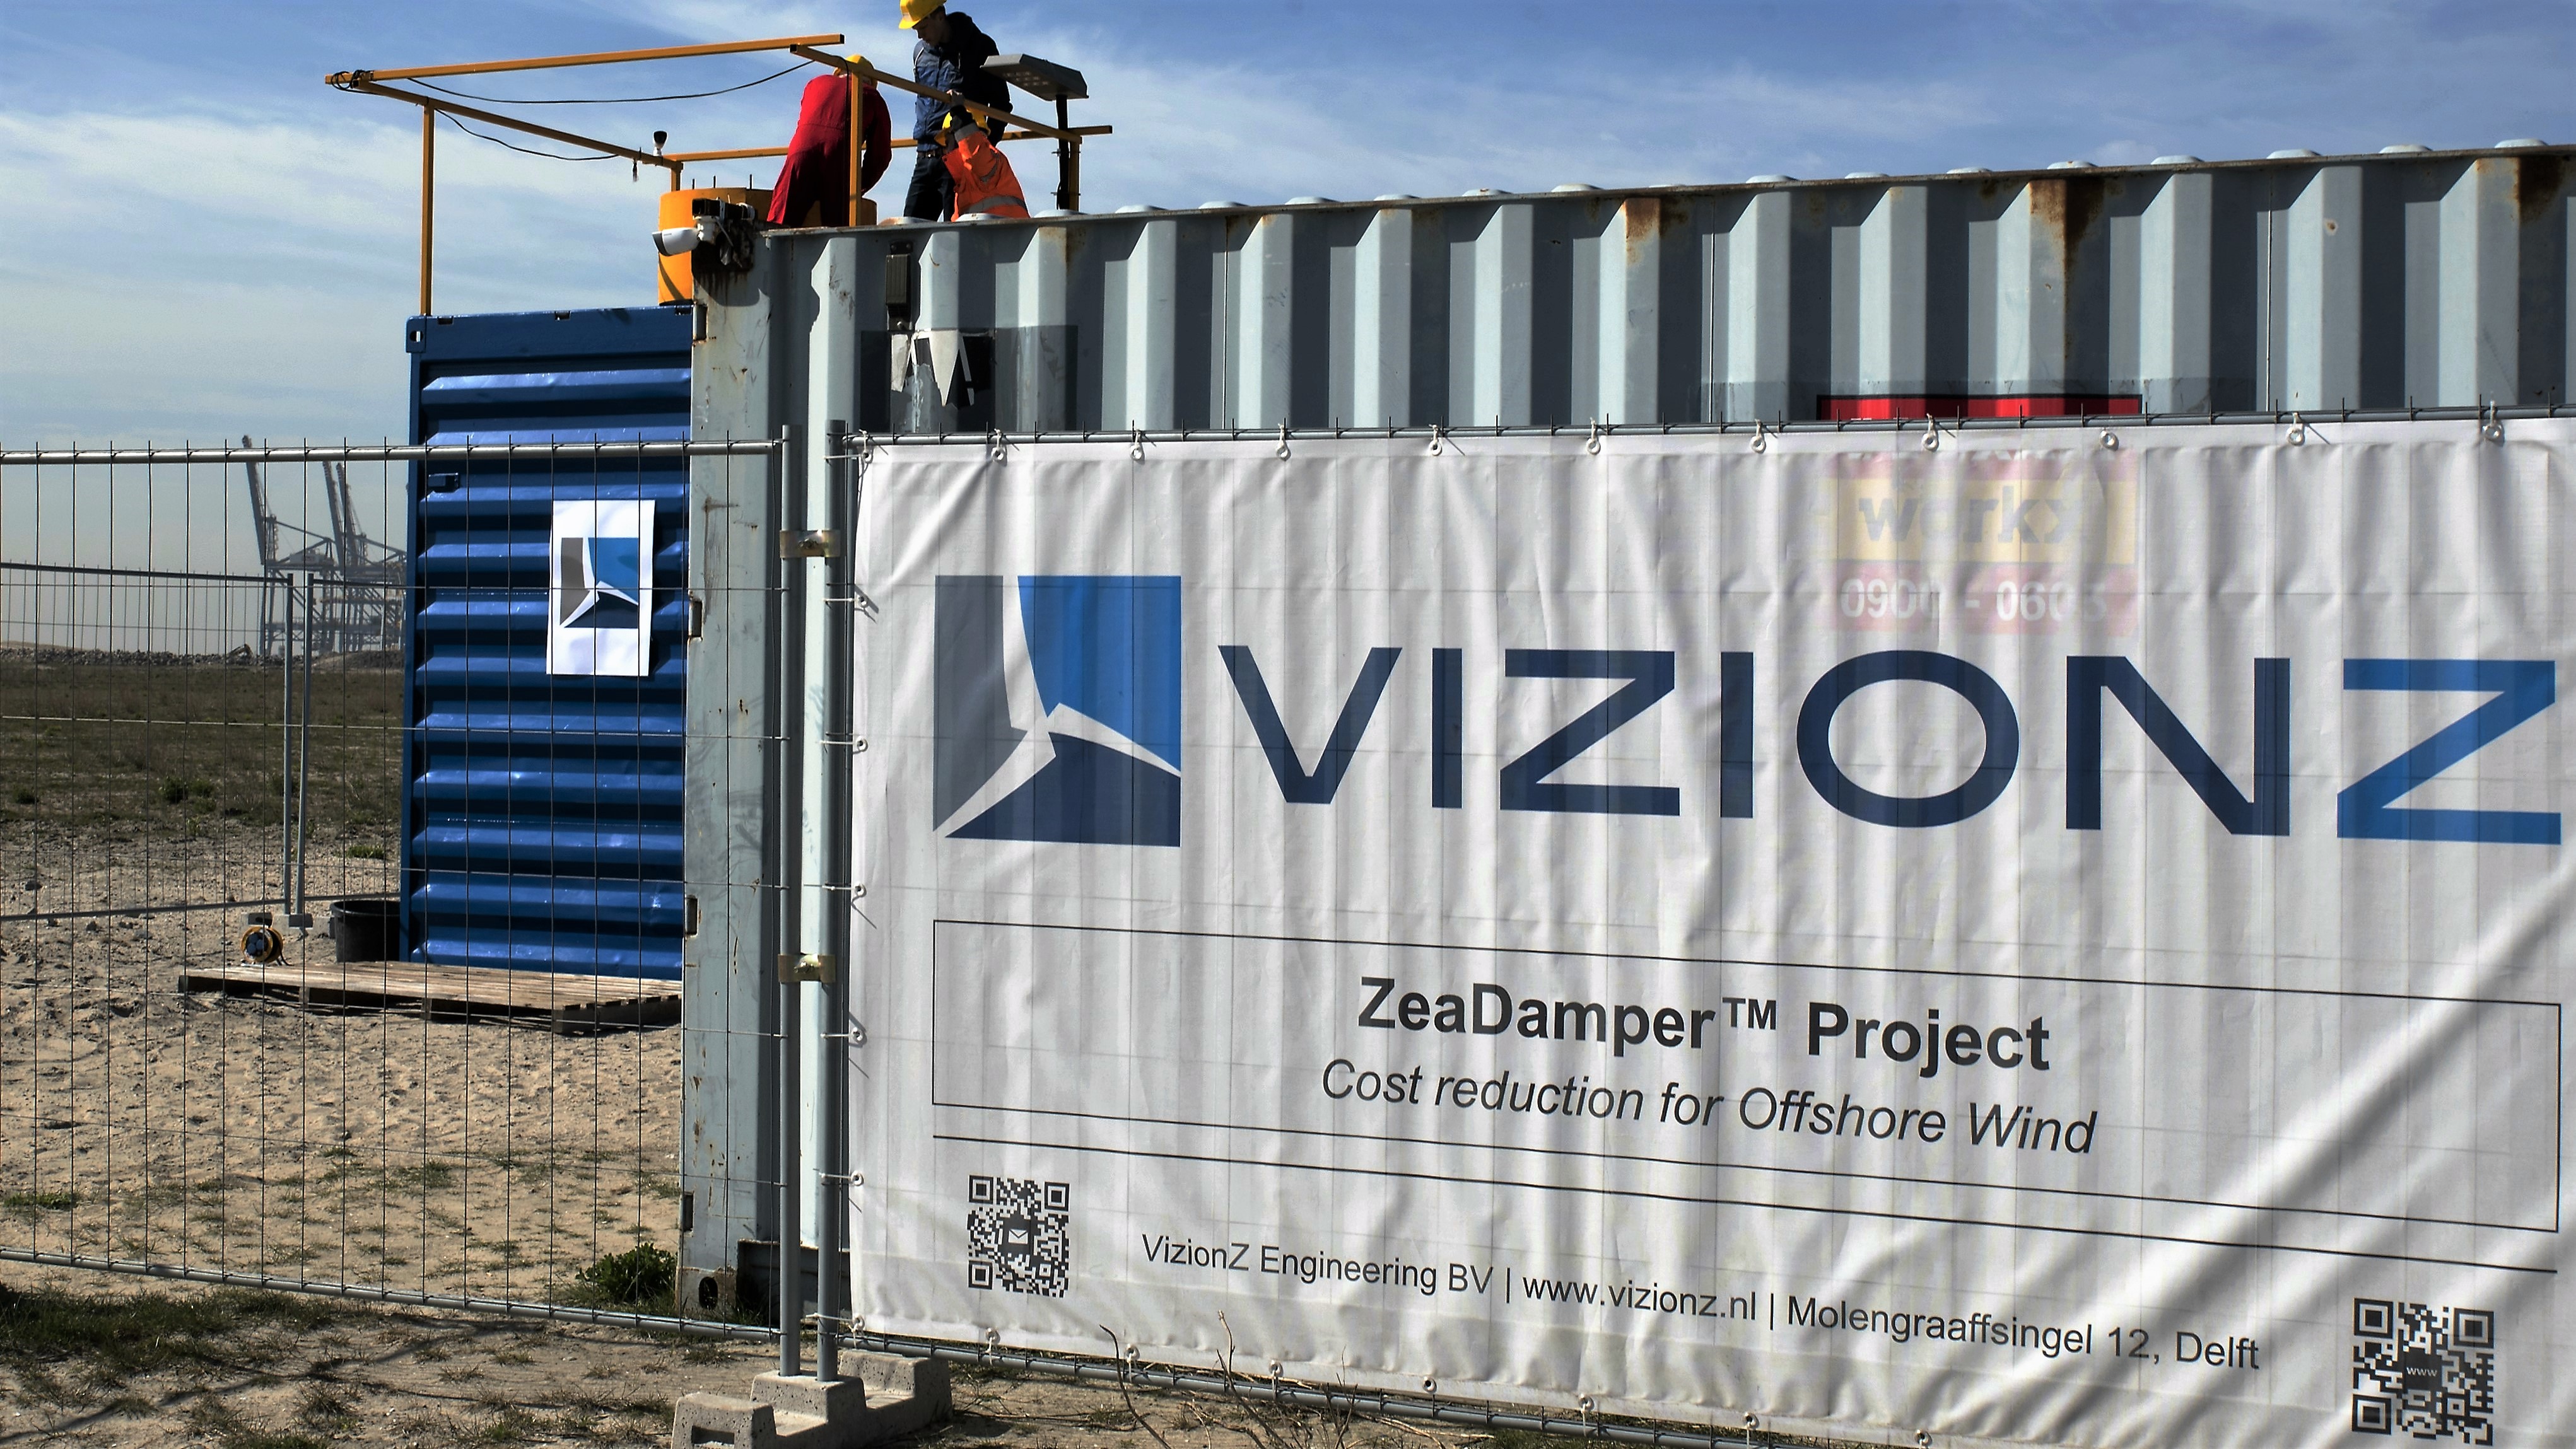 VizionZ Engineering Test and Demonstration Site Port of Rotterdam